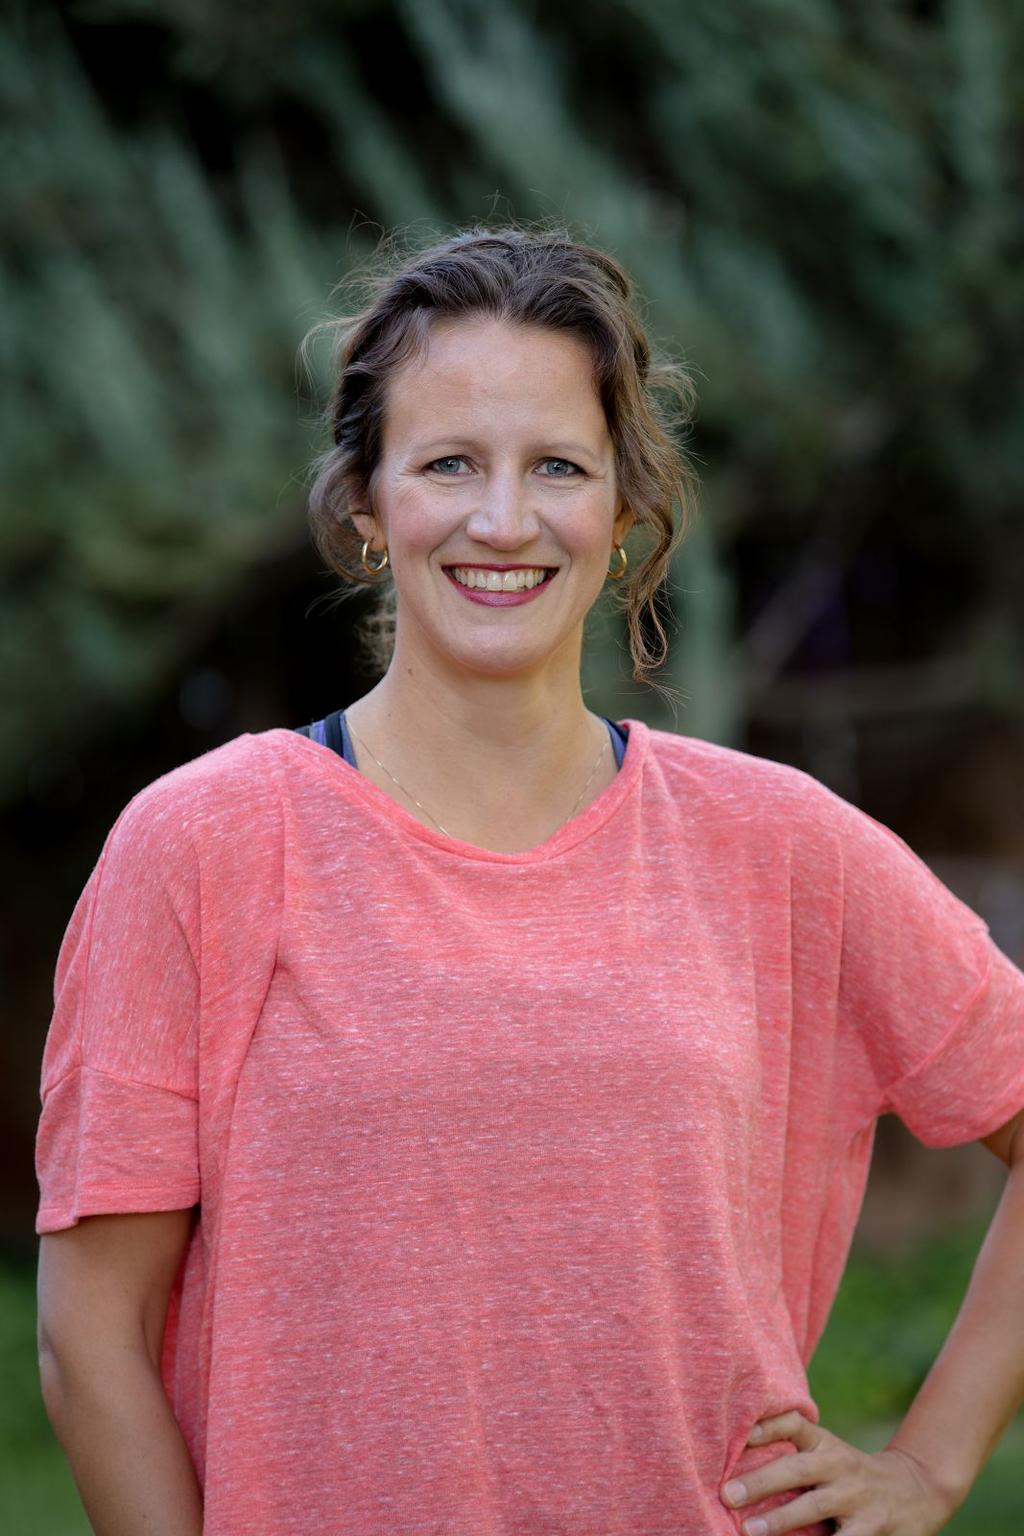 MARIA JENSON NASM-Certified Personal Trainer, Fitness Nutrition Specialist; RRCA Running Coach, yoga teacher, PiYo instructor Maria Jenson is a displaced southern girl who s learned to love the Rocky